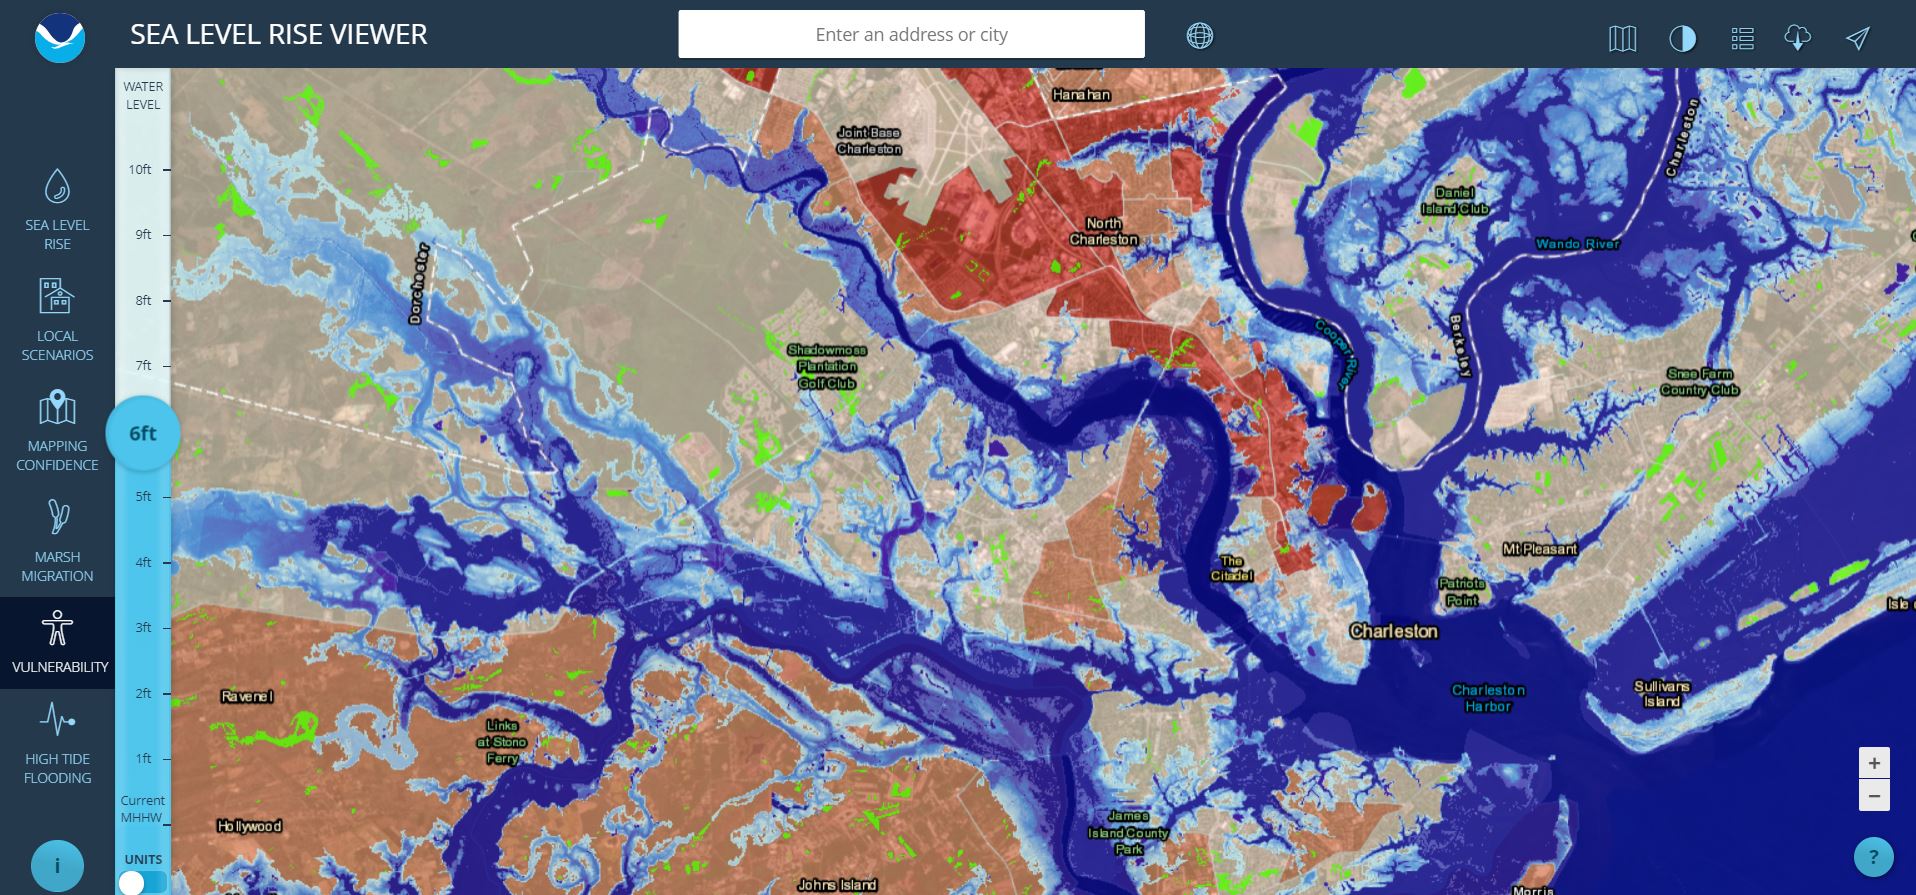 A screenshot of the tool, Sea Level Rise Viewer, being used.